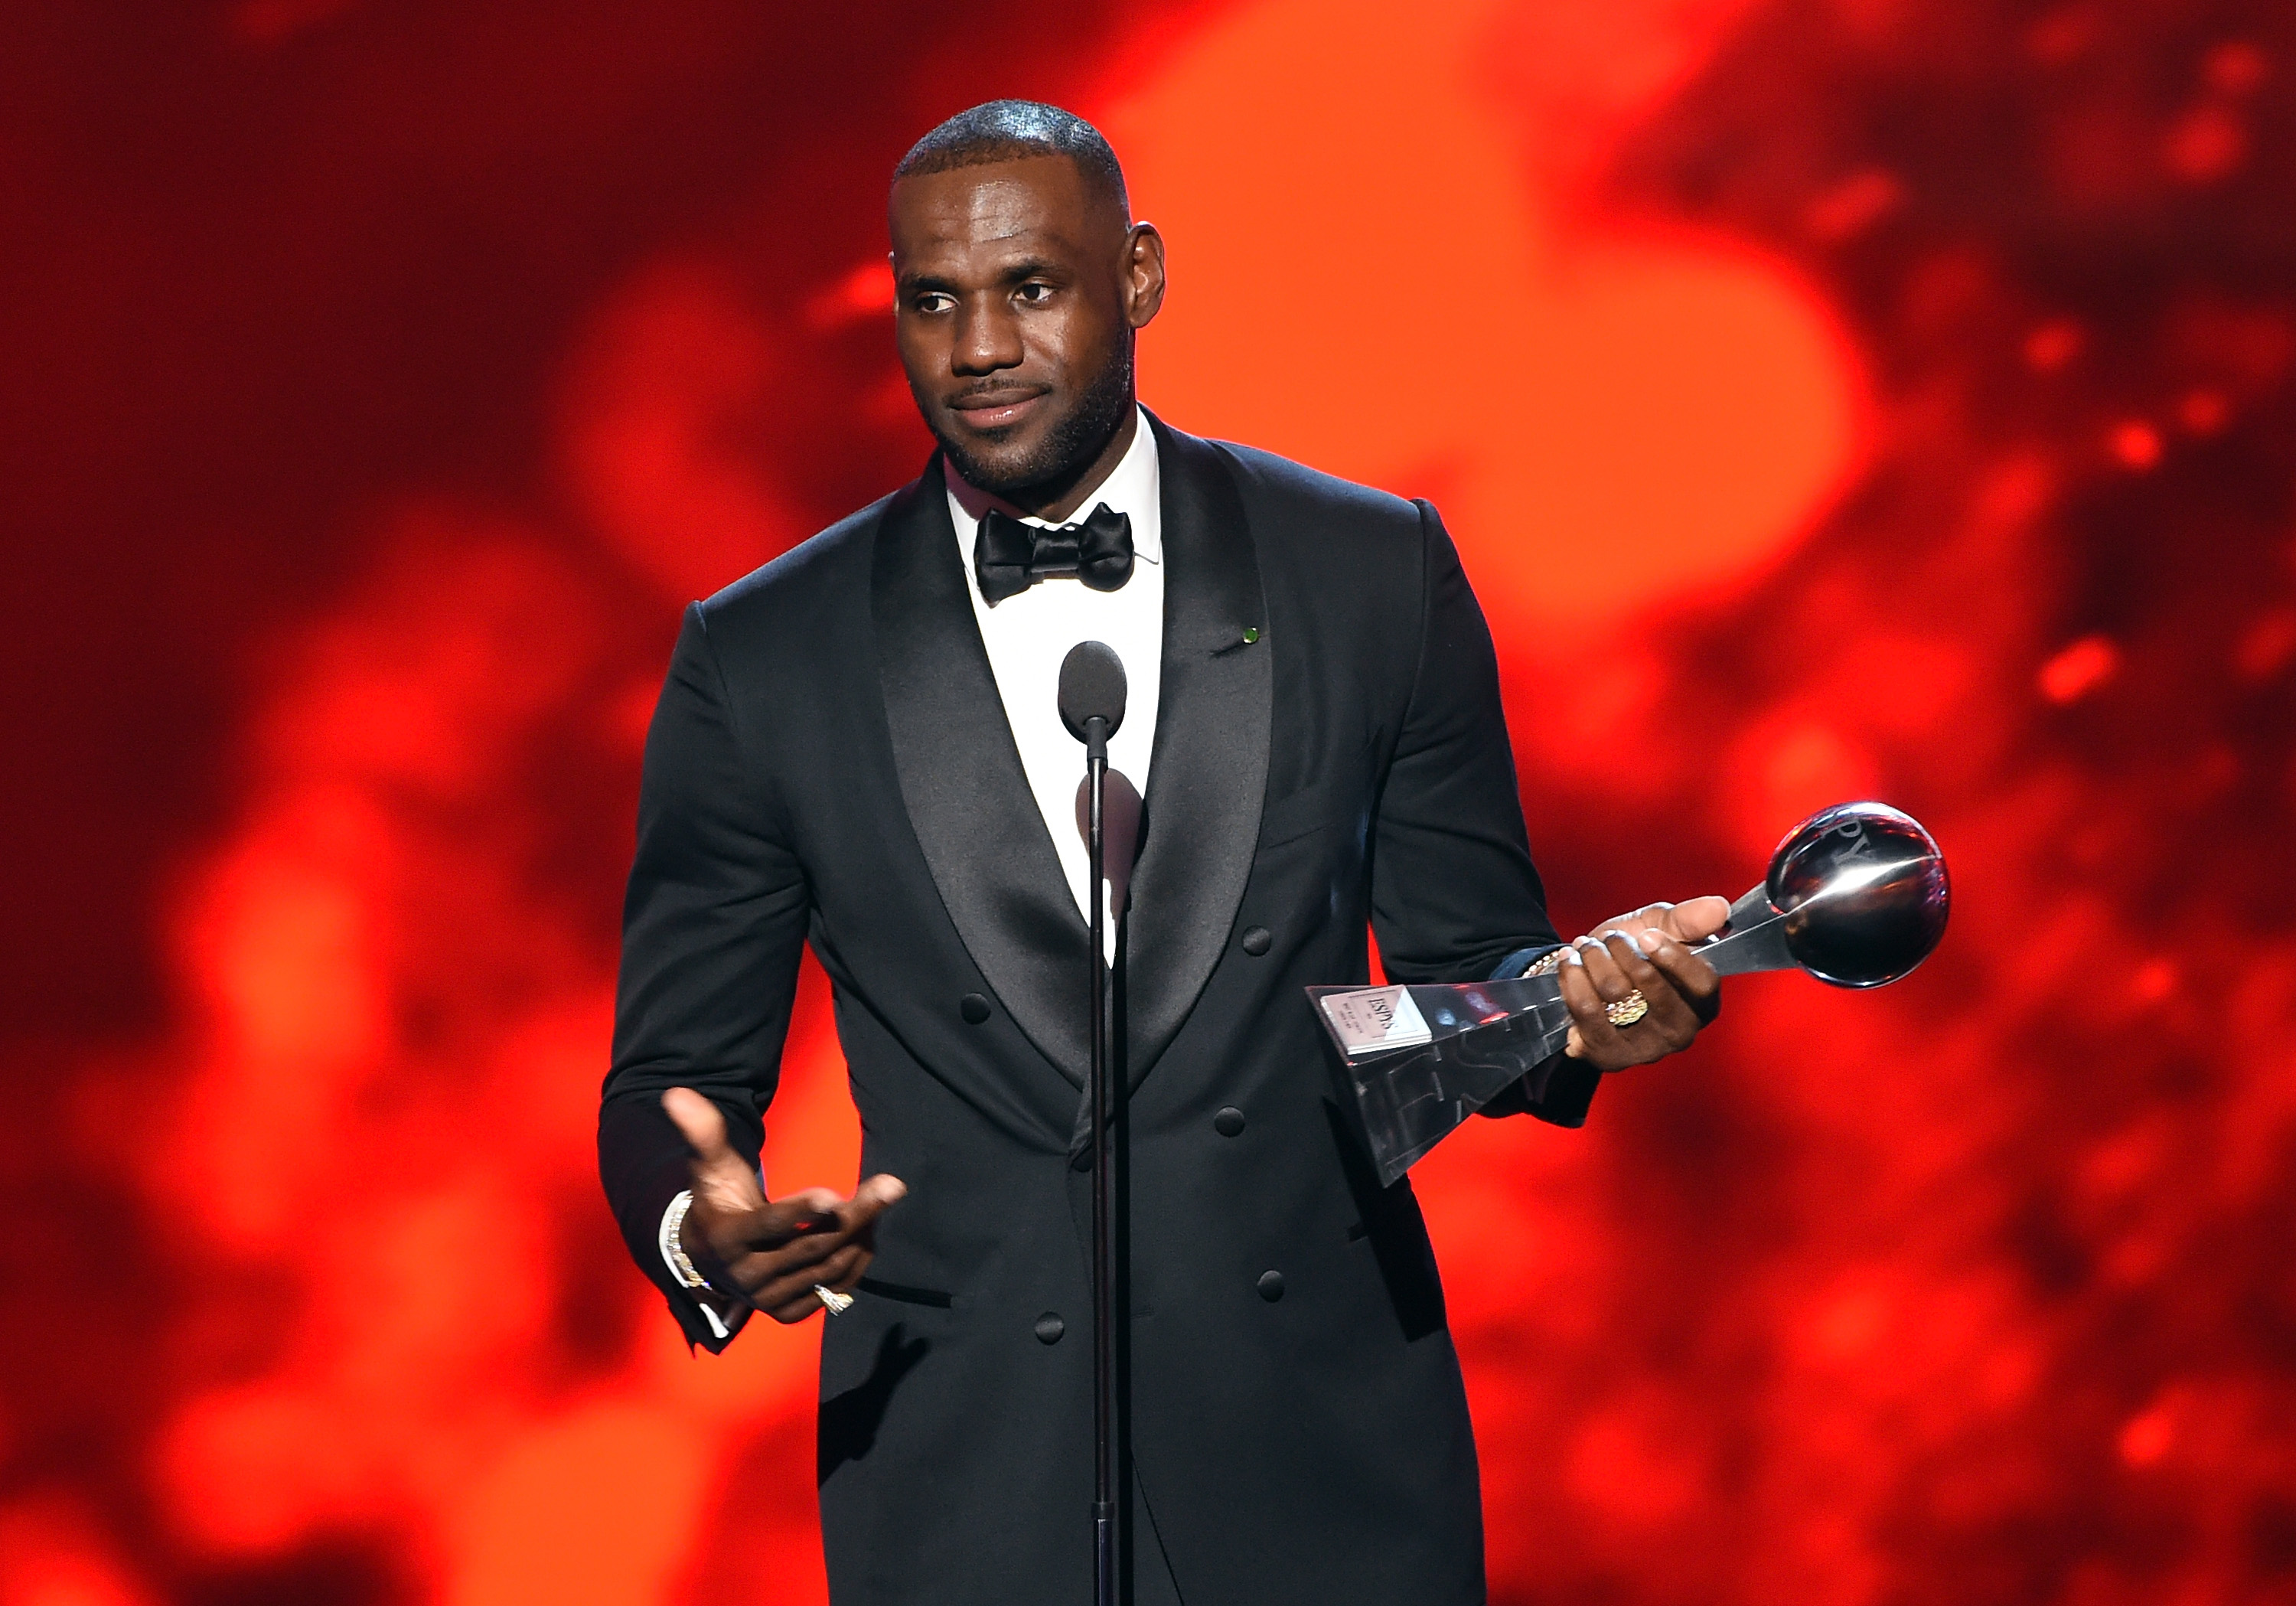 LOS ANGELES, CA - JULY 13: NBA player LeBron James accepts the Best Male Athlete award onstage during the 2016 ESPYS at Microsoft Theater on July 13, 2016 in Los Angeles, California.   Kevin Winter/Getty Images/AFP